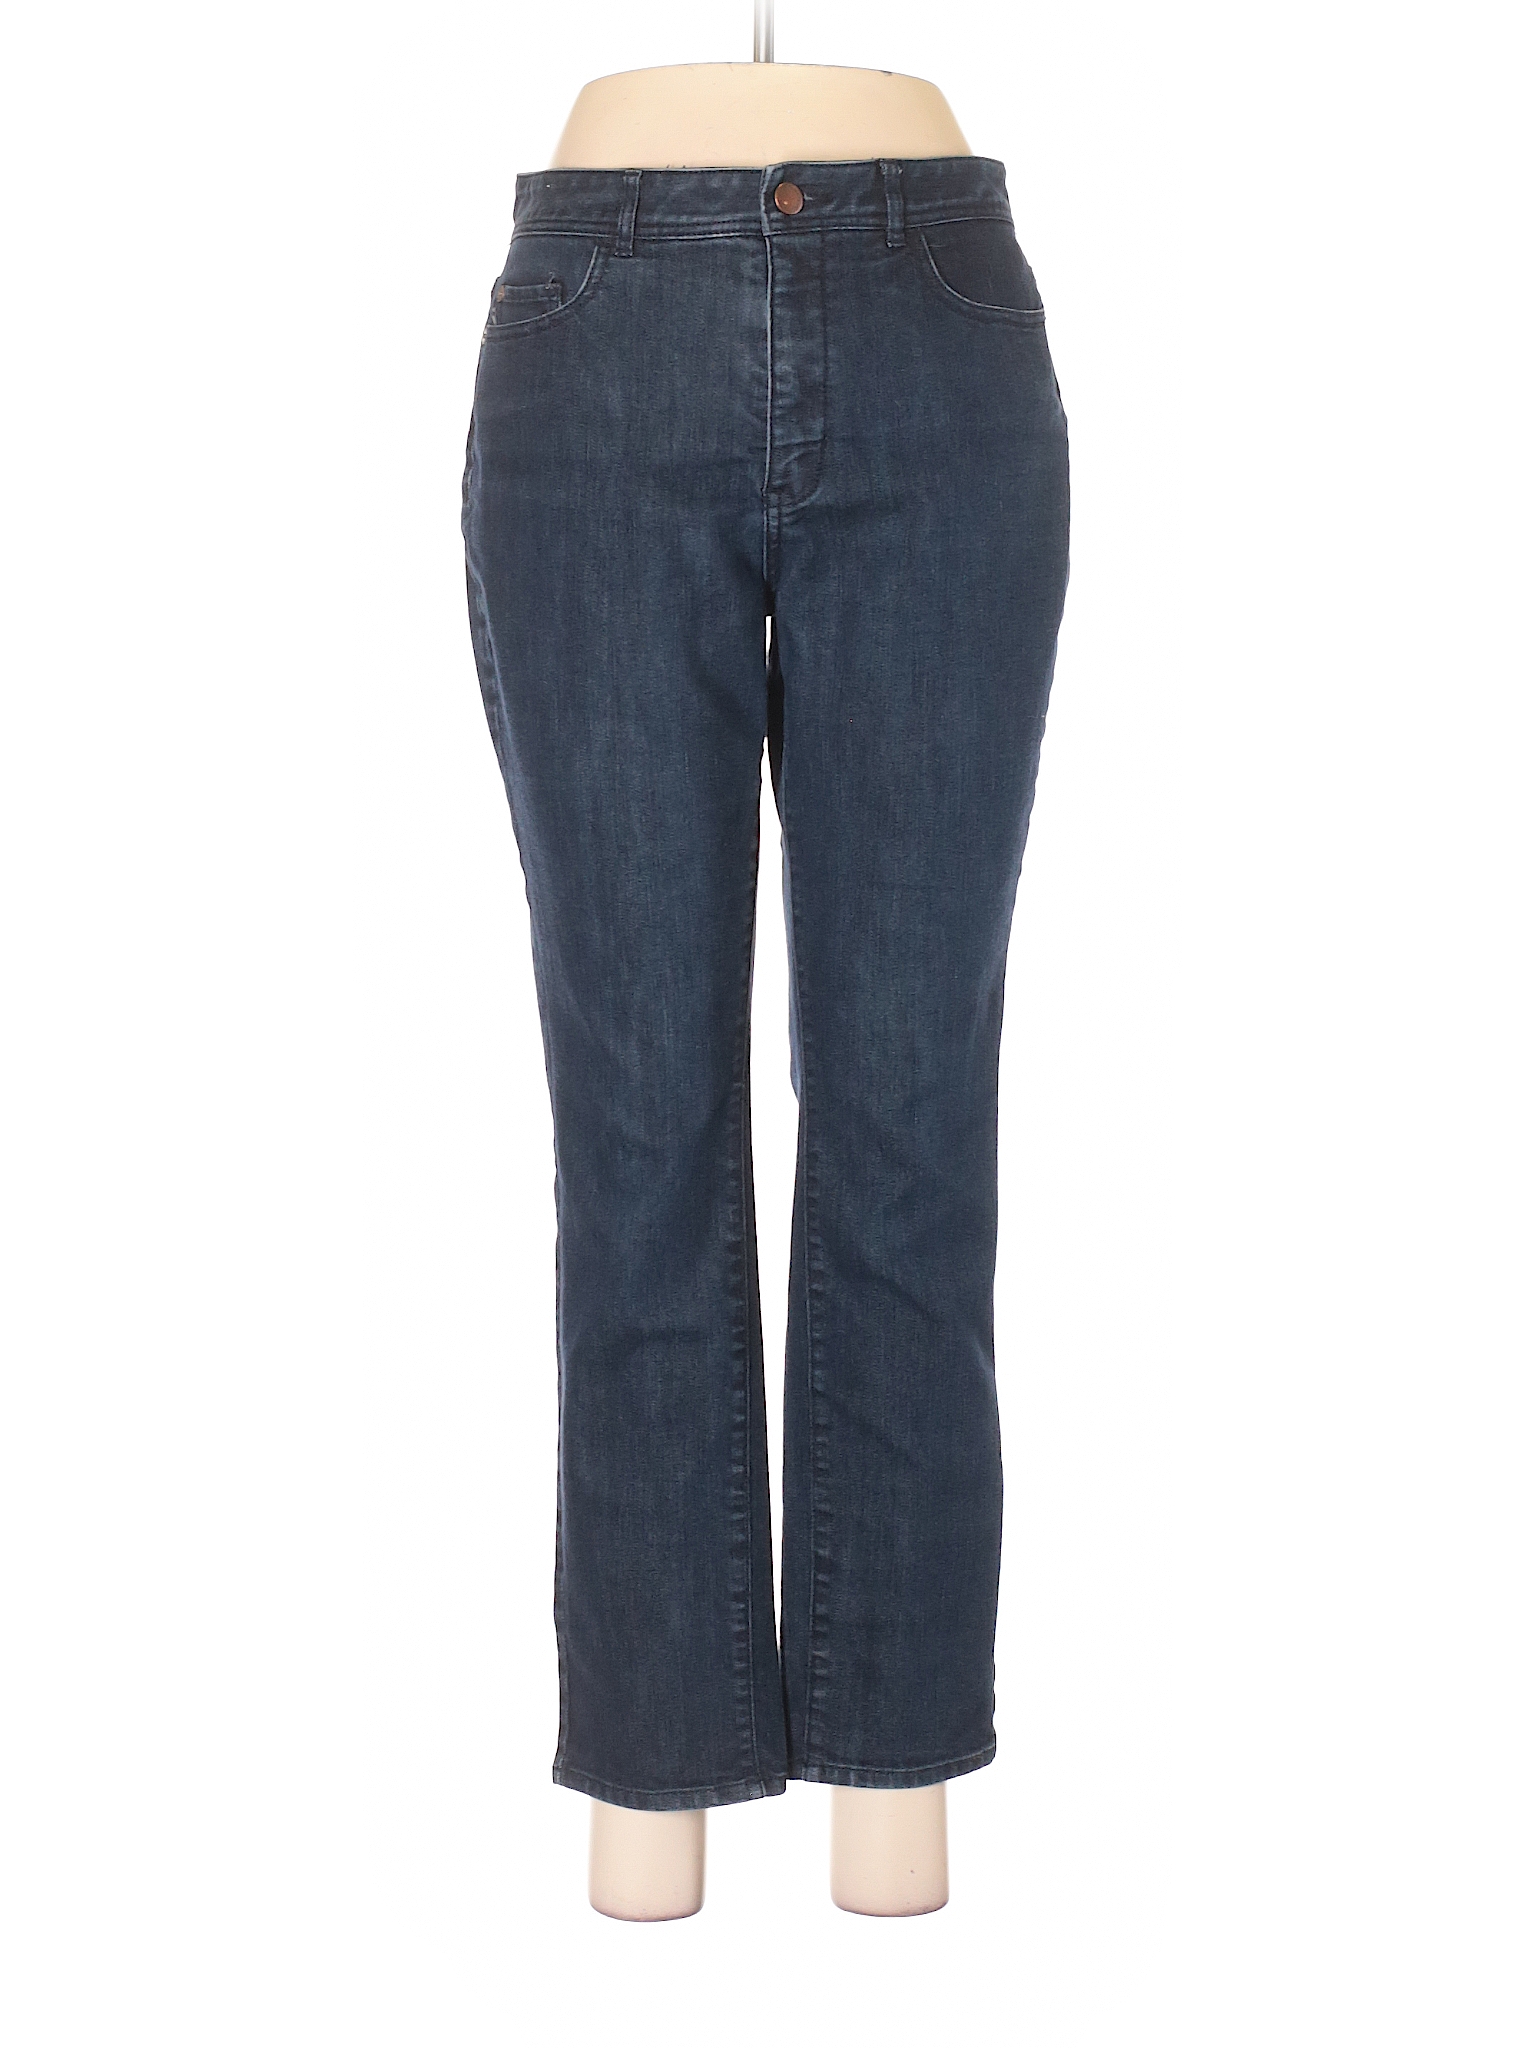 Coldwater Creek Solid Dark Blue Jeans Size 8 (Petite) - 84% off | thredUP